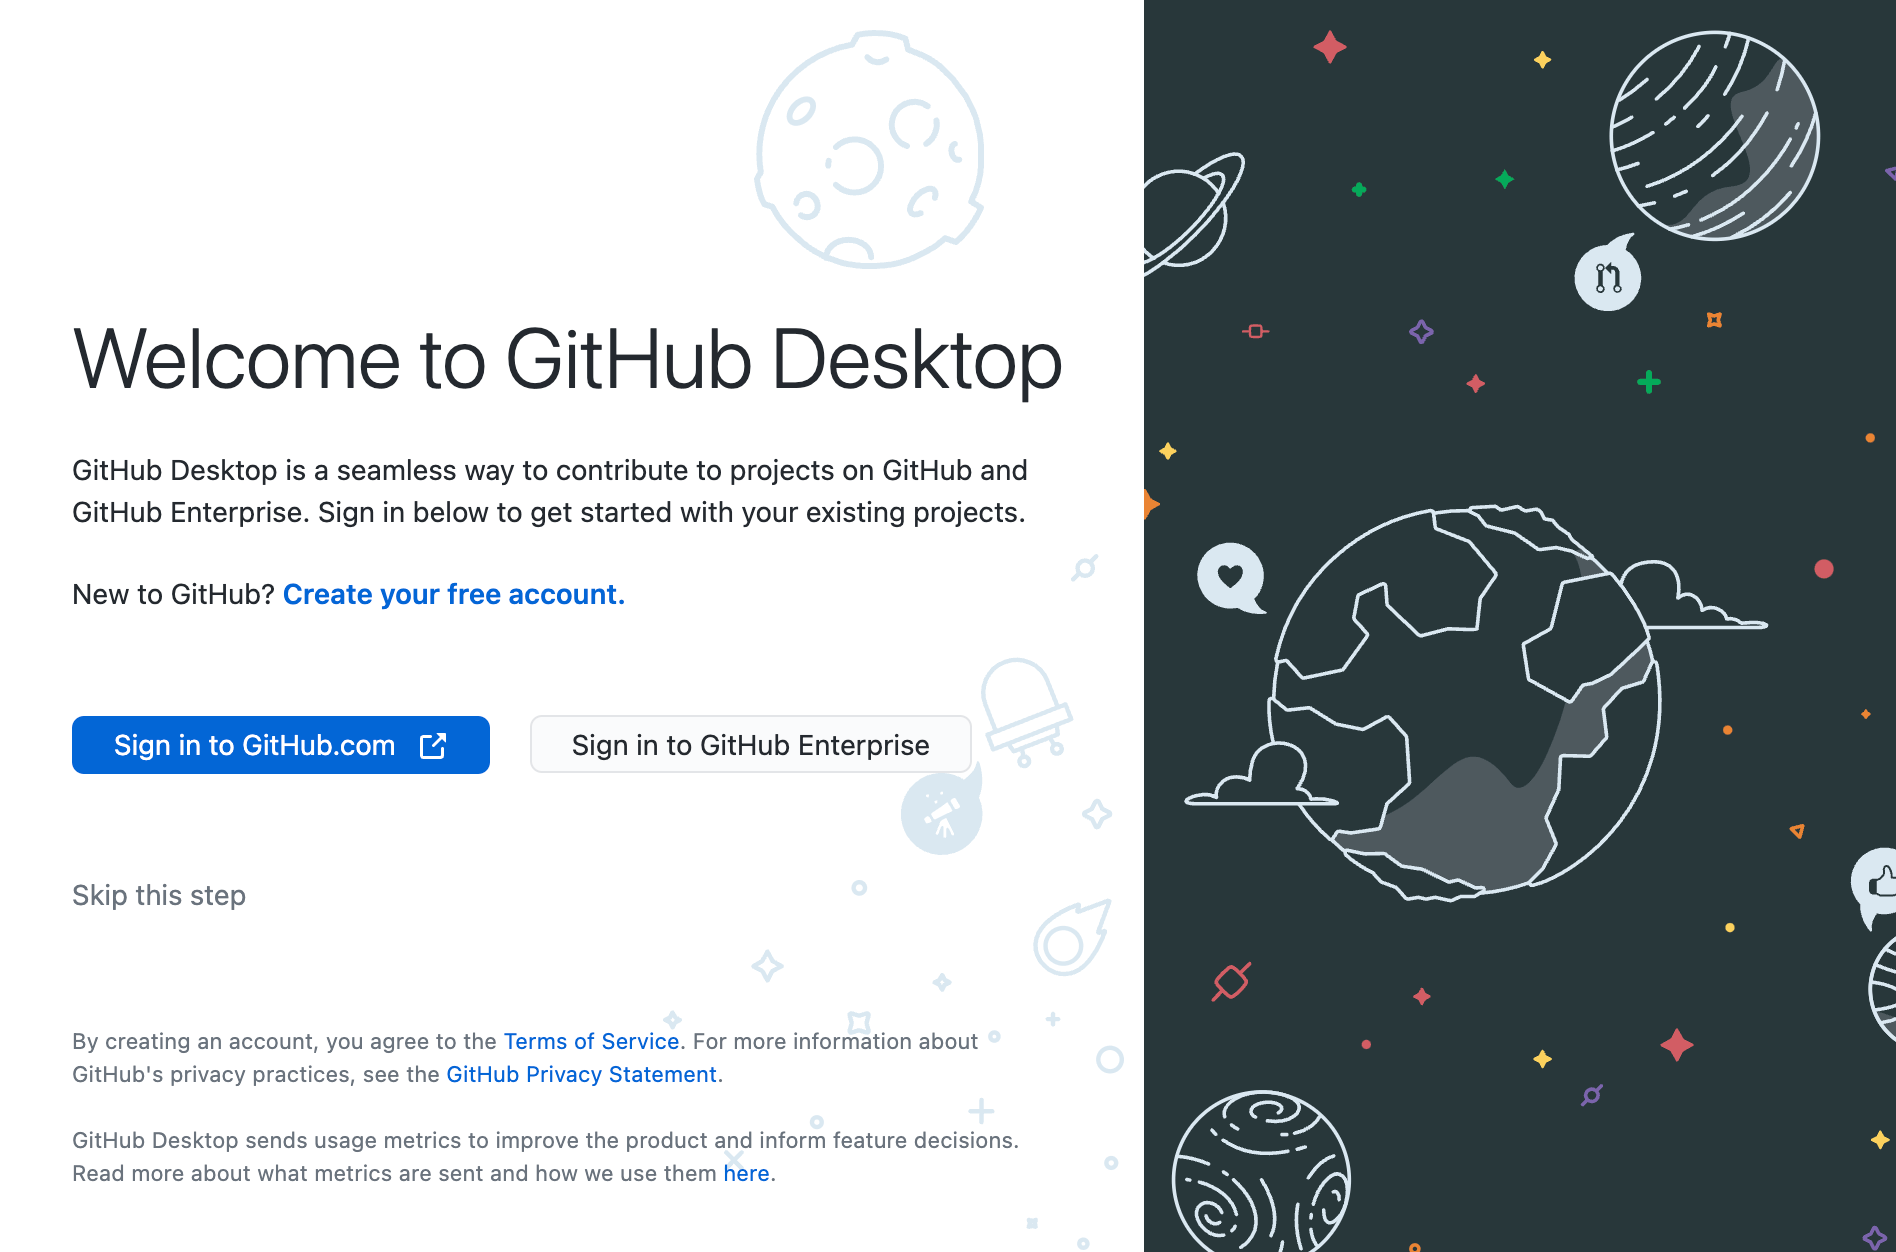 Sign in to GitHub.com